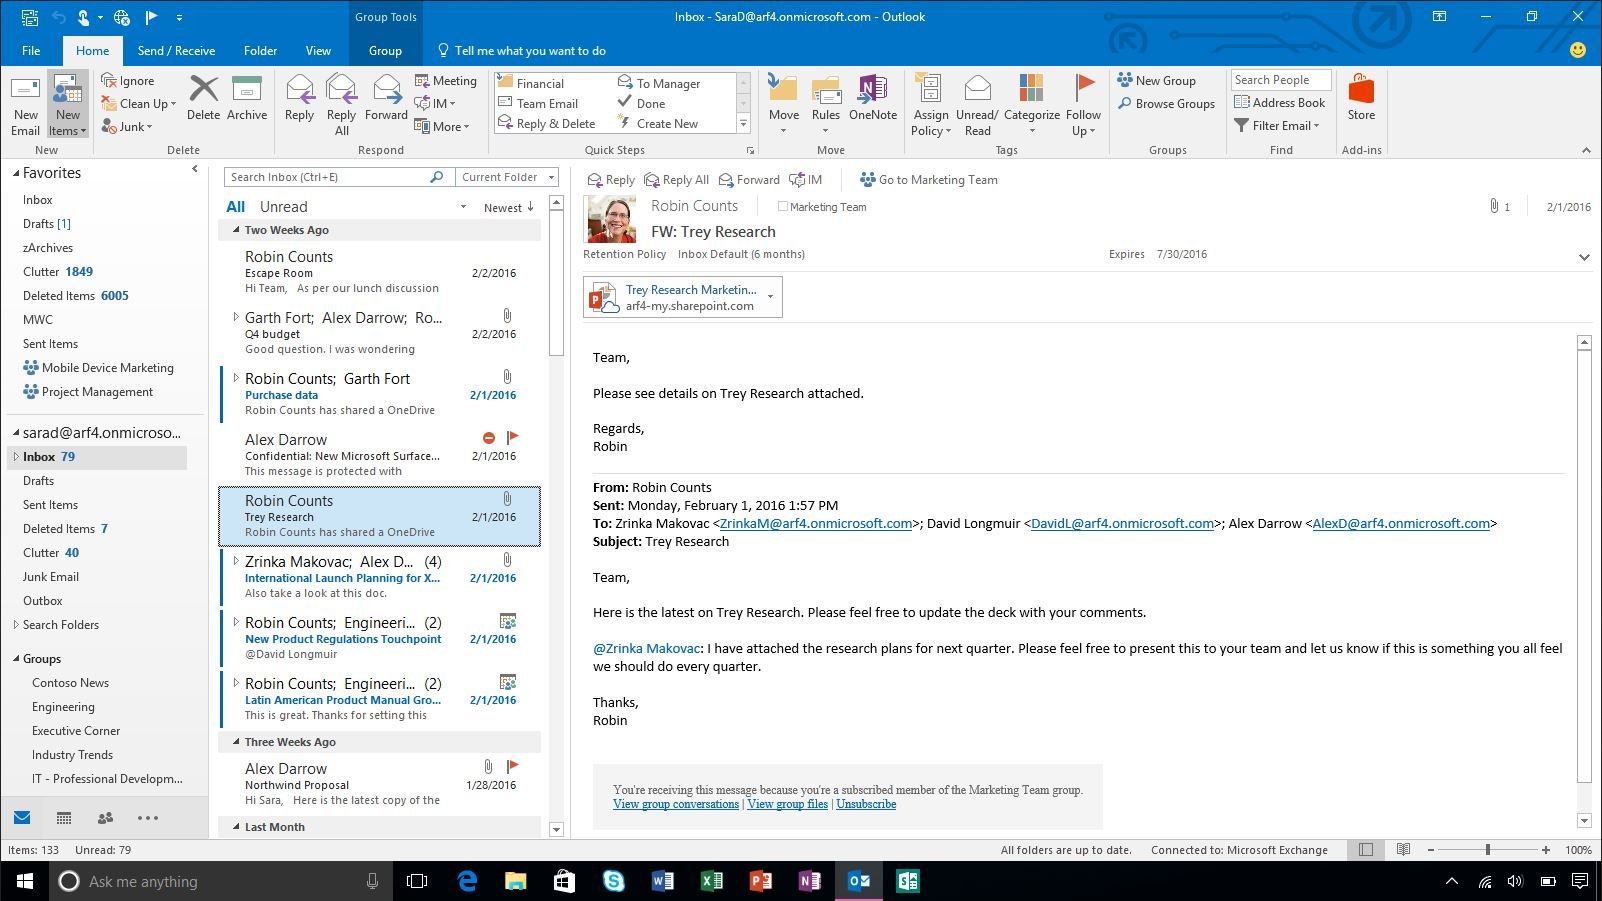 outlook 365 email